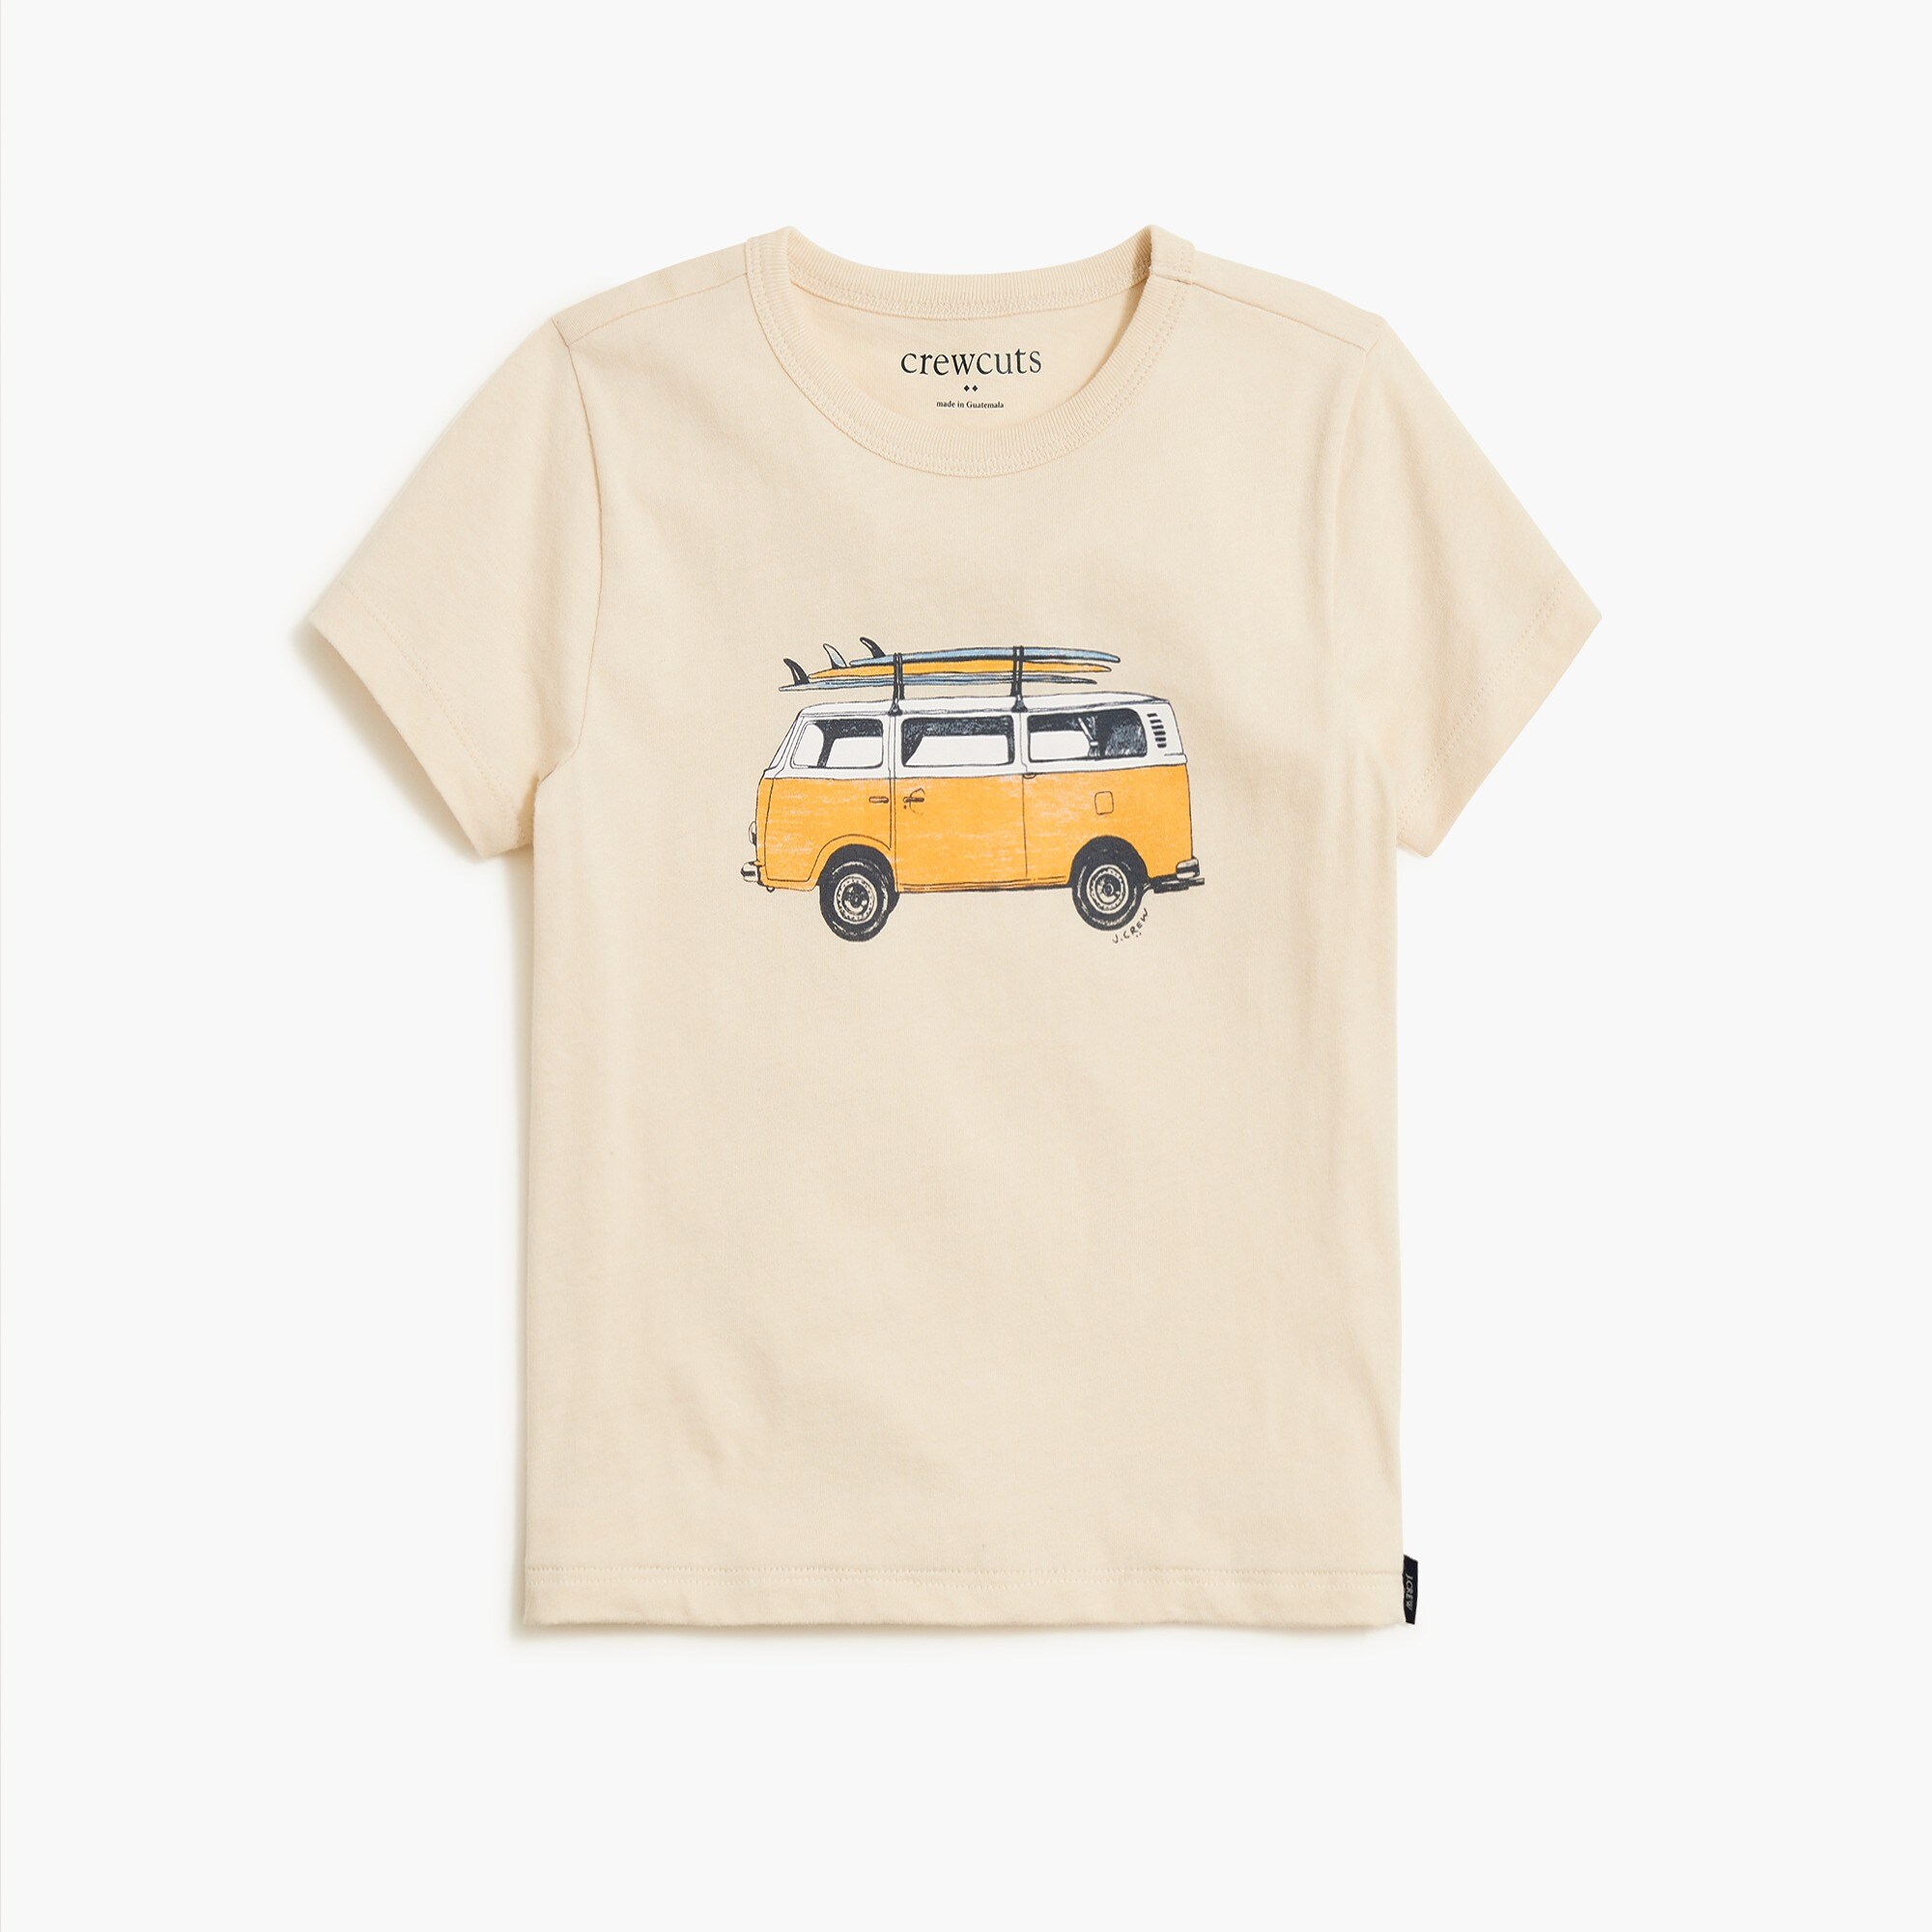  Boys' truck with surfboard graphic tee